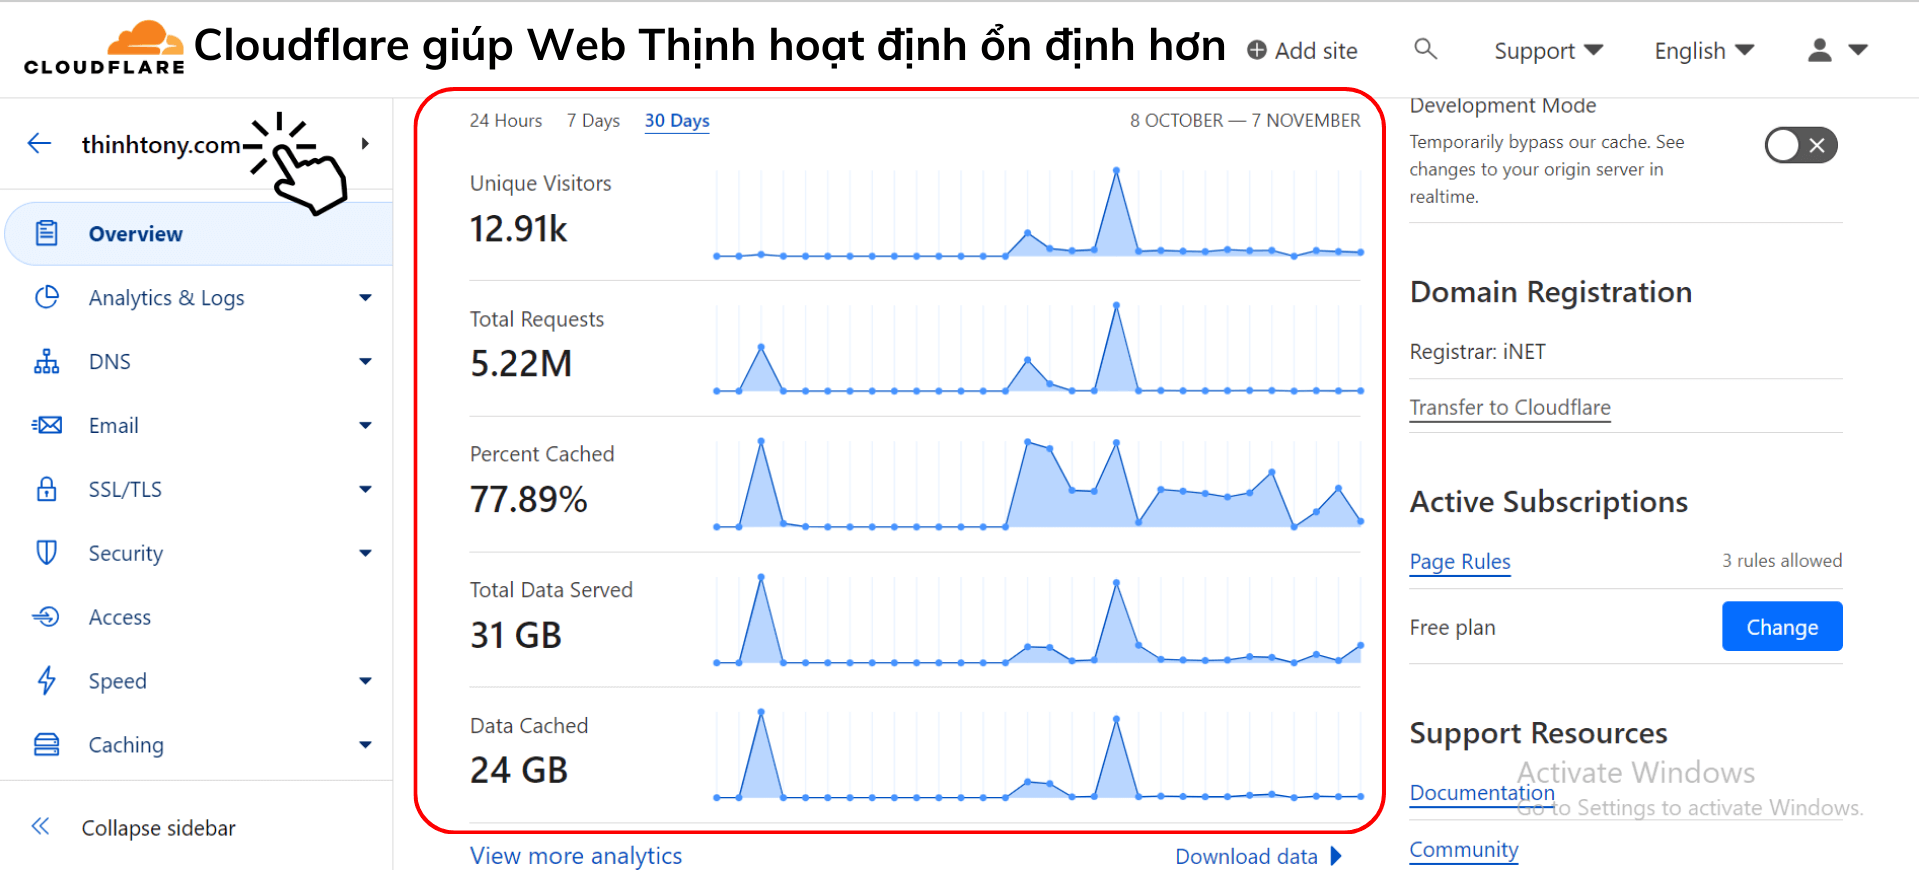 Cloudflare giup Web Thinh hoat dinh on dinh hon 1